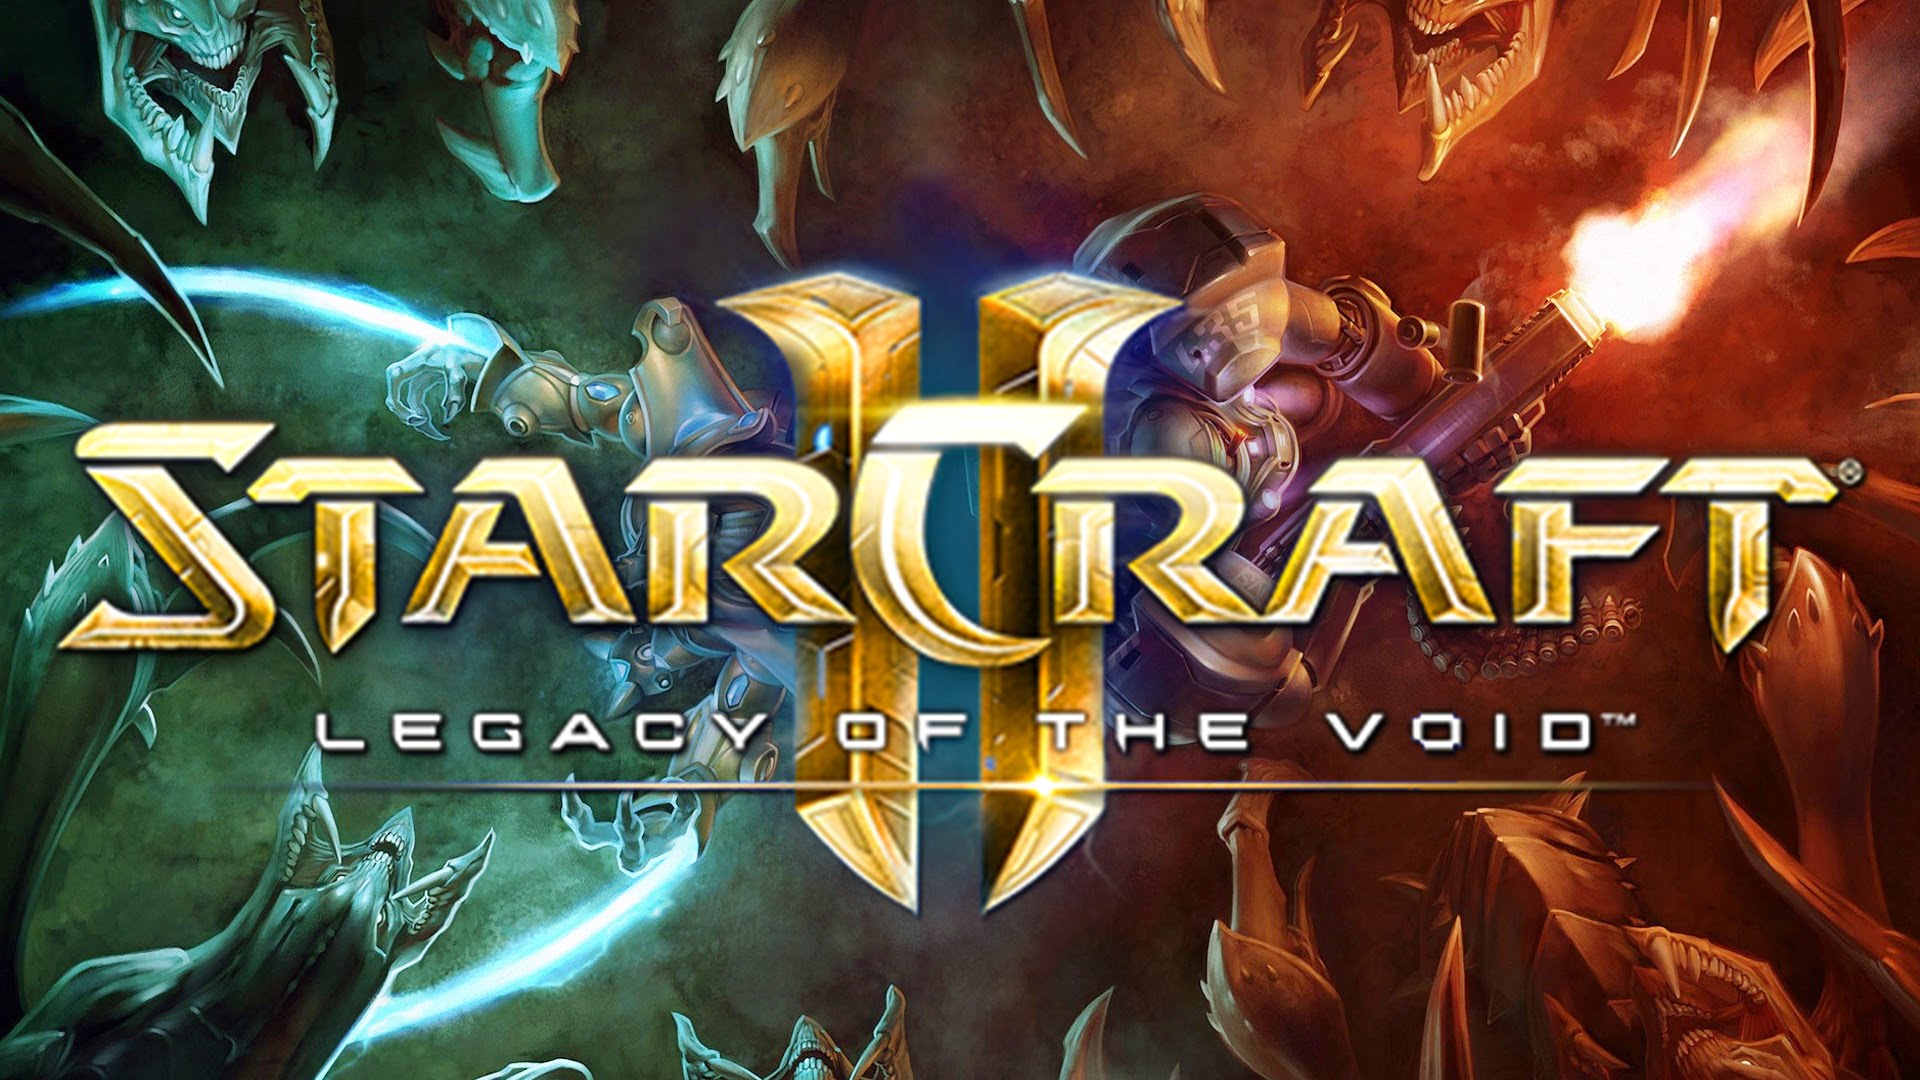 Starcraft Ii Legacy Of The Void Wallpaper Video Game Hq